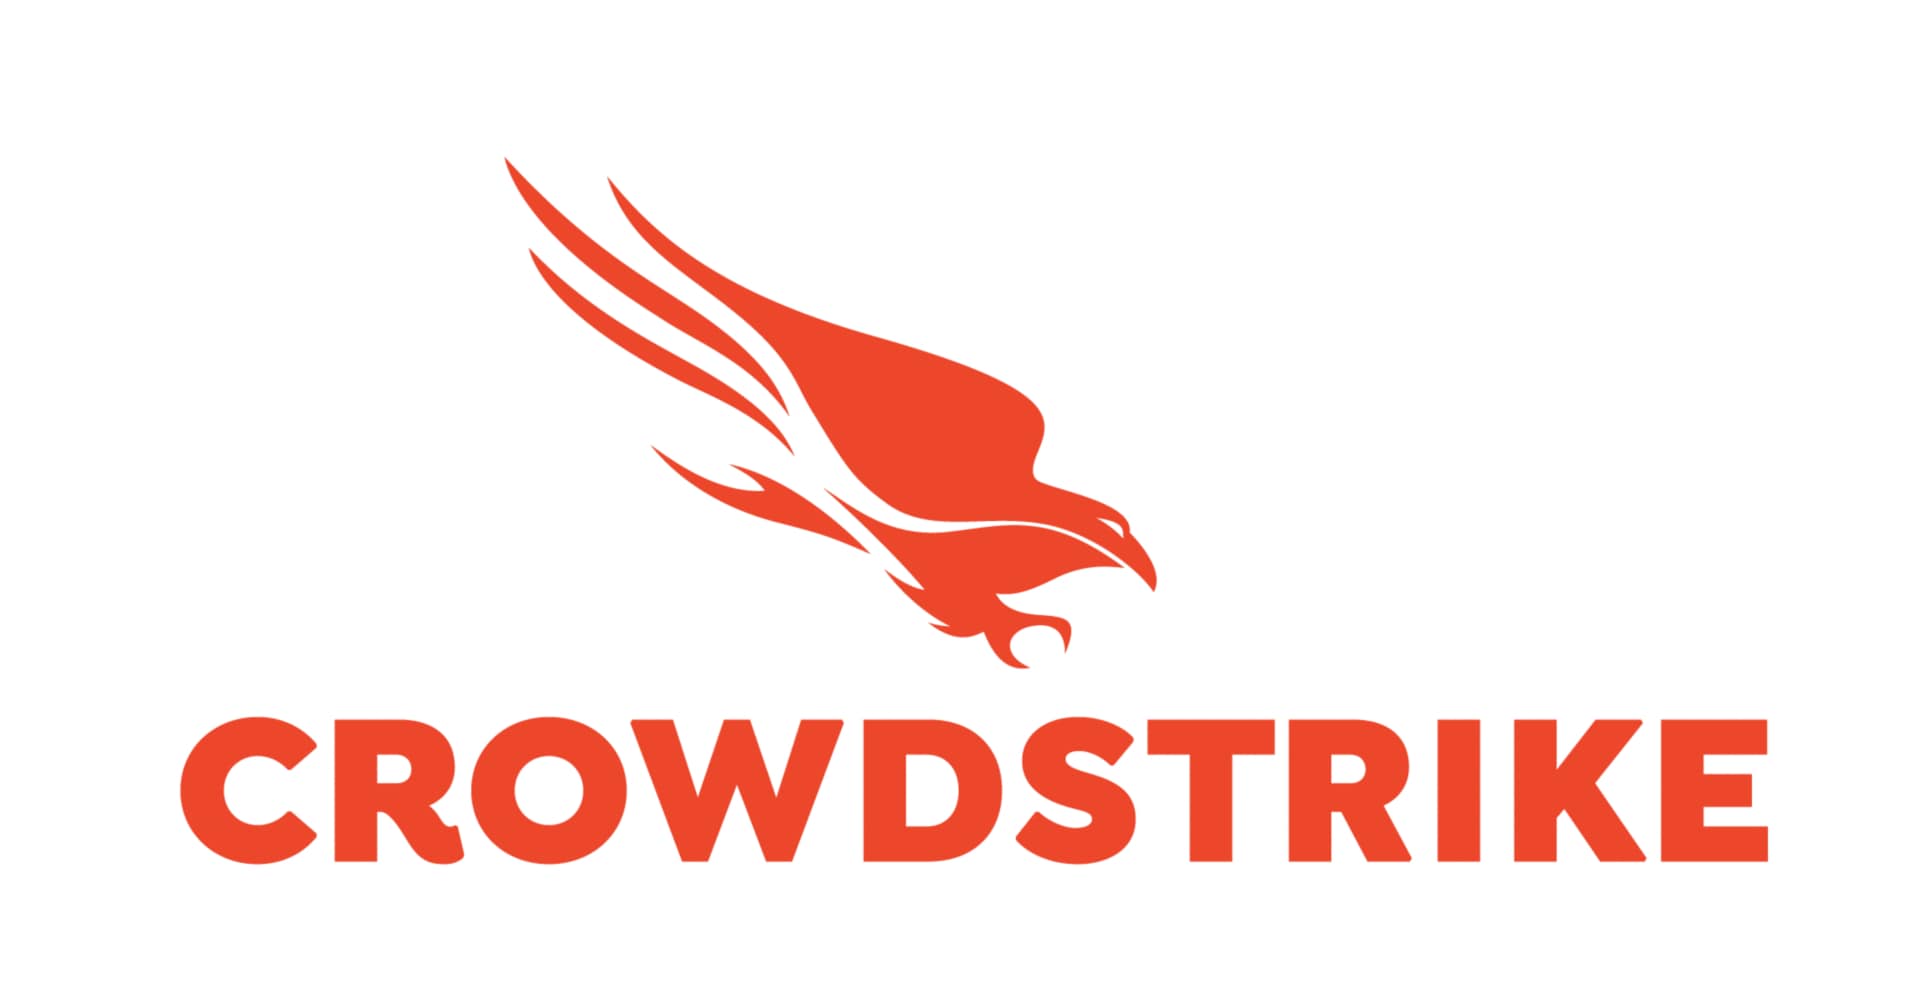 CrowdStrike 4-Month Humio Cloud for Falcon 365 Day Retention Software Subscription (1-149 Licenses)